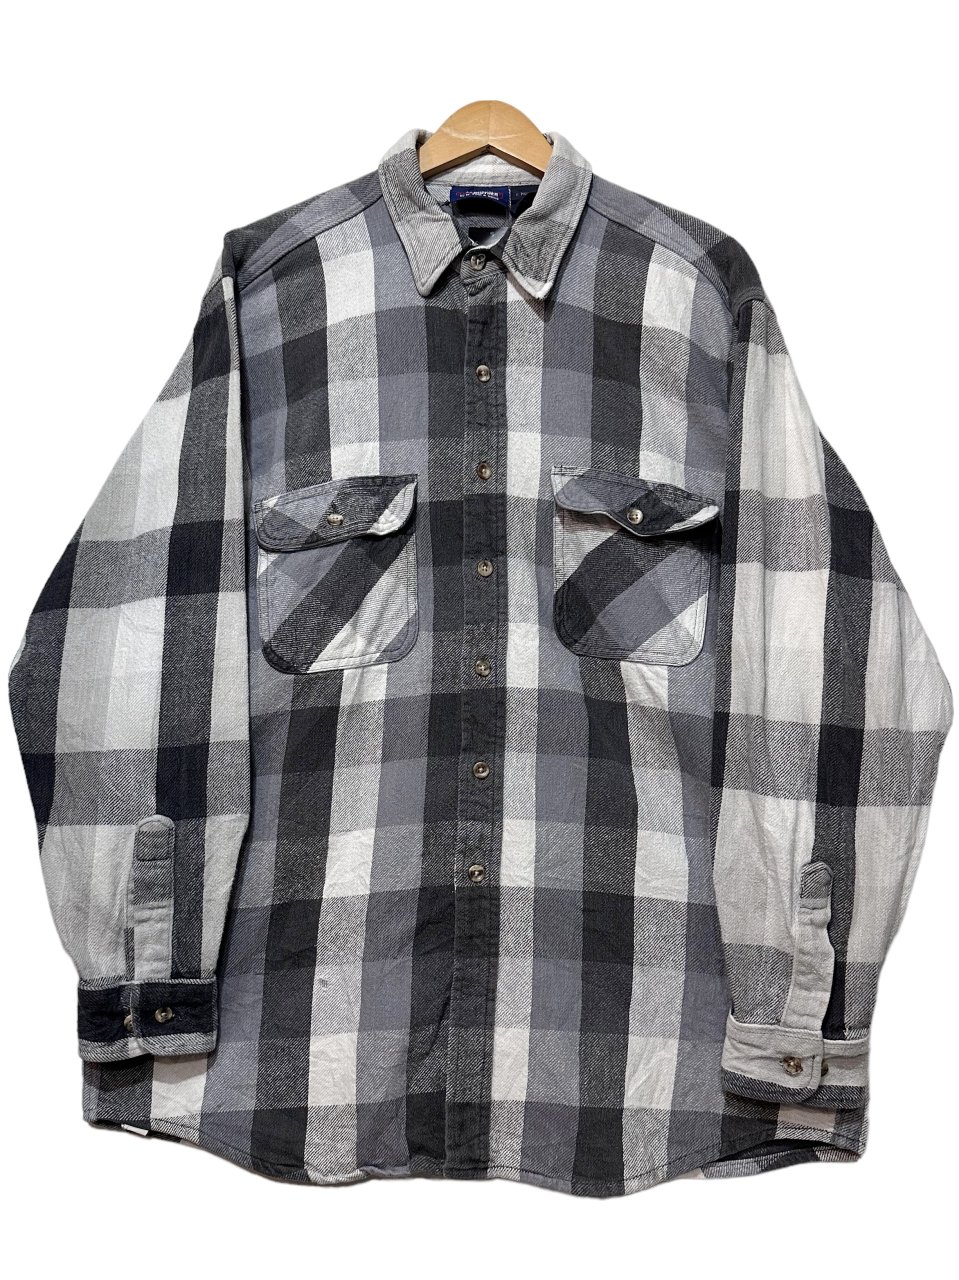 00s FIVE BROTHER Check Flannel L/S Shirt 灰黒 XL ファイブブラザー 